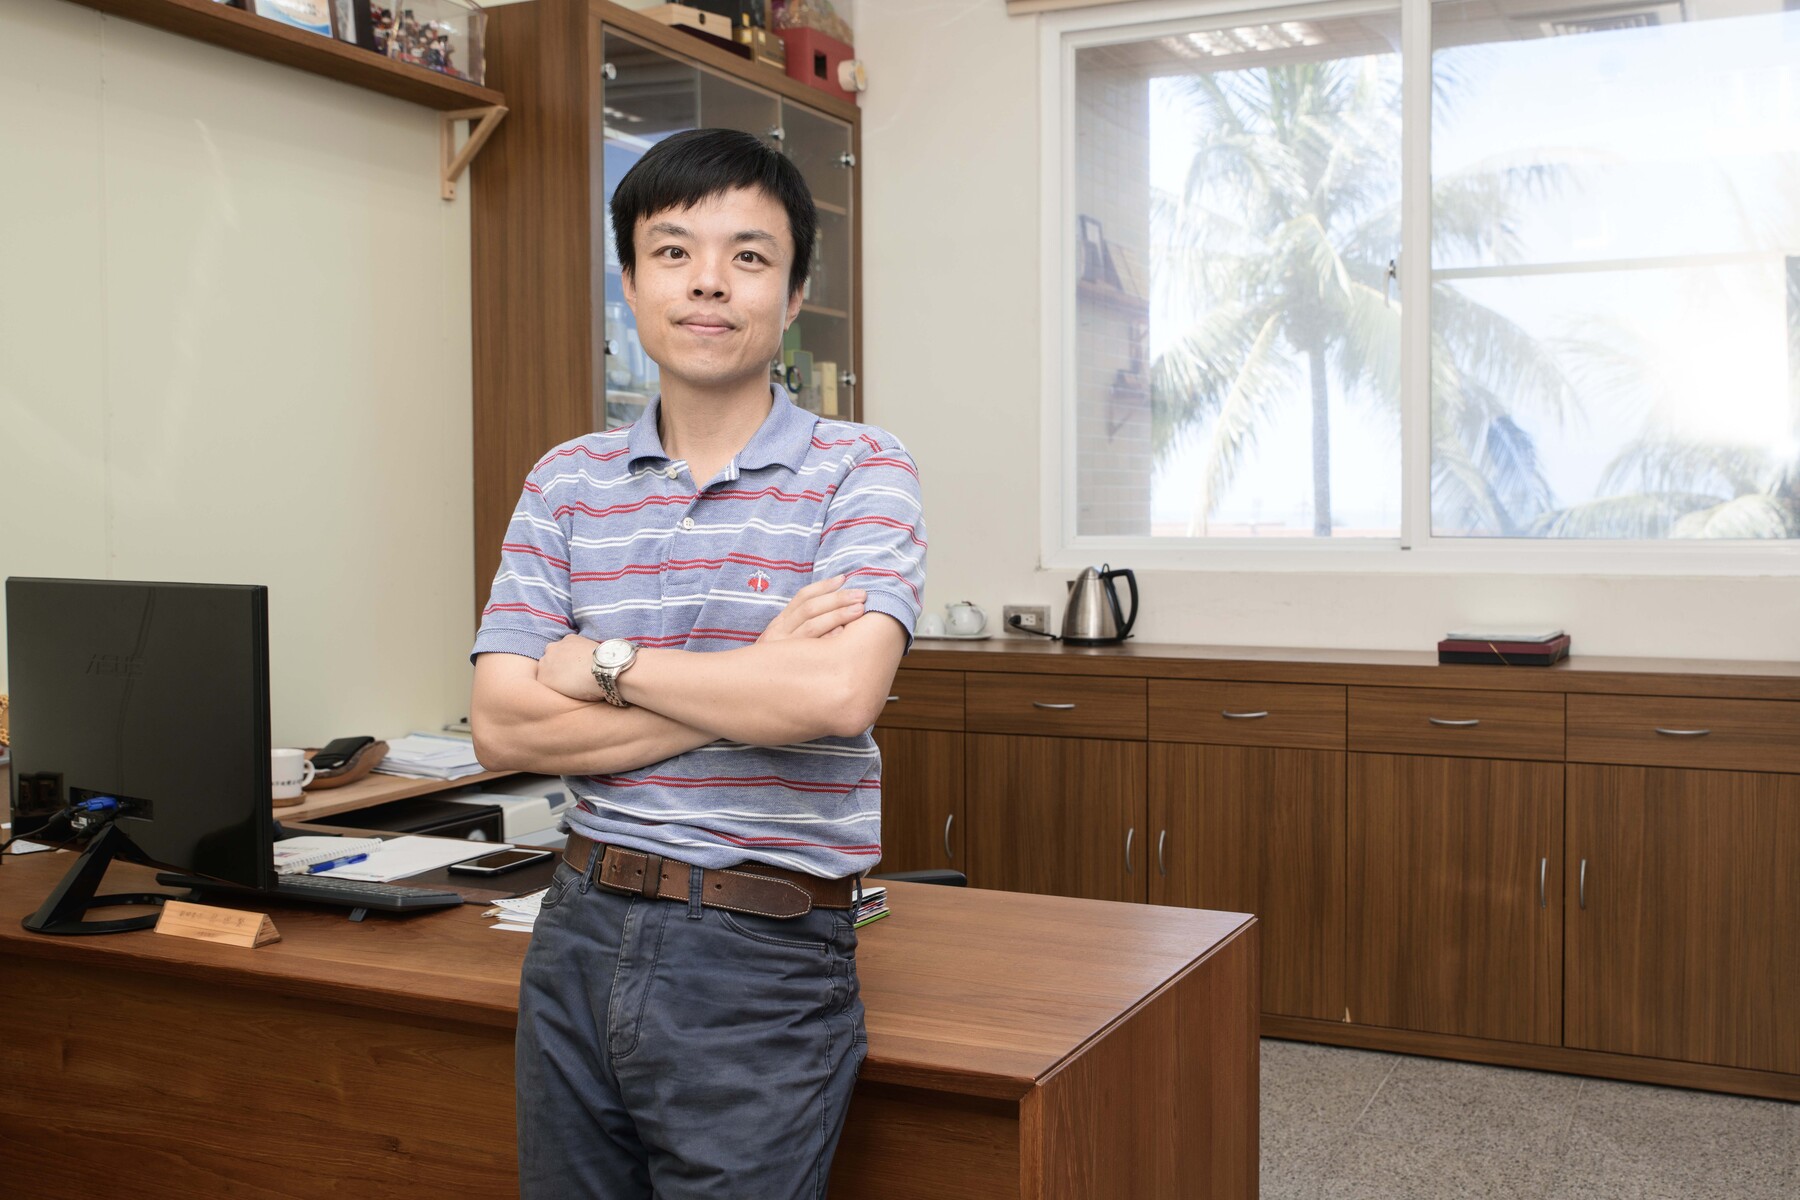 Tsung-Hsien Lin, Si Wan Chair Professor of the Department of Photonics at NSYSU, innovated super-high period chiral photonic crystals to promote the development of intense pulsed light applications.